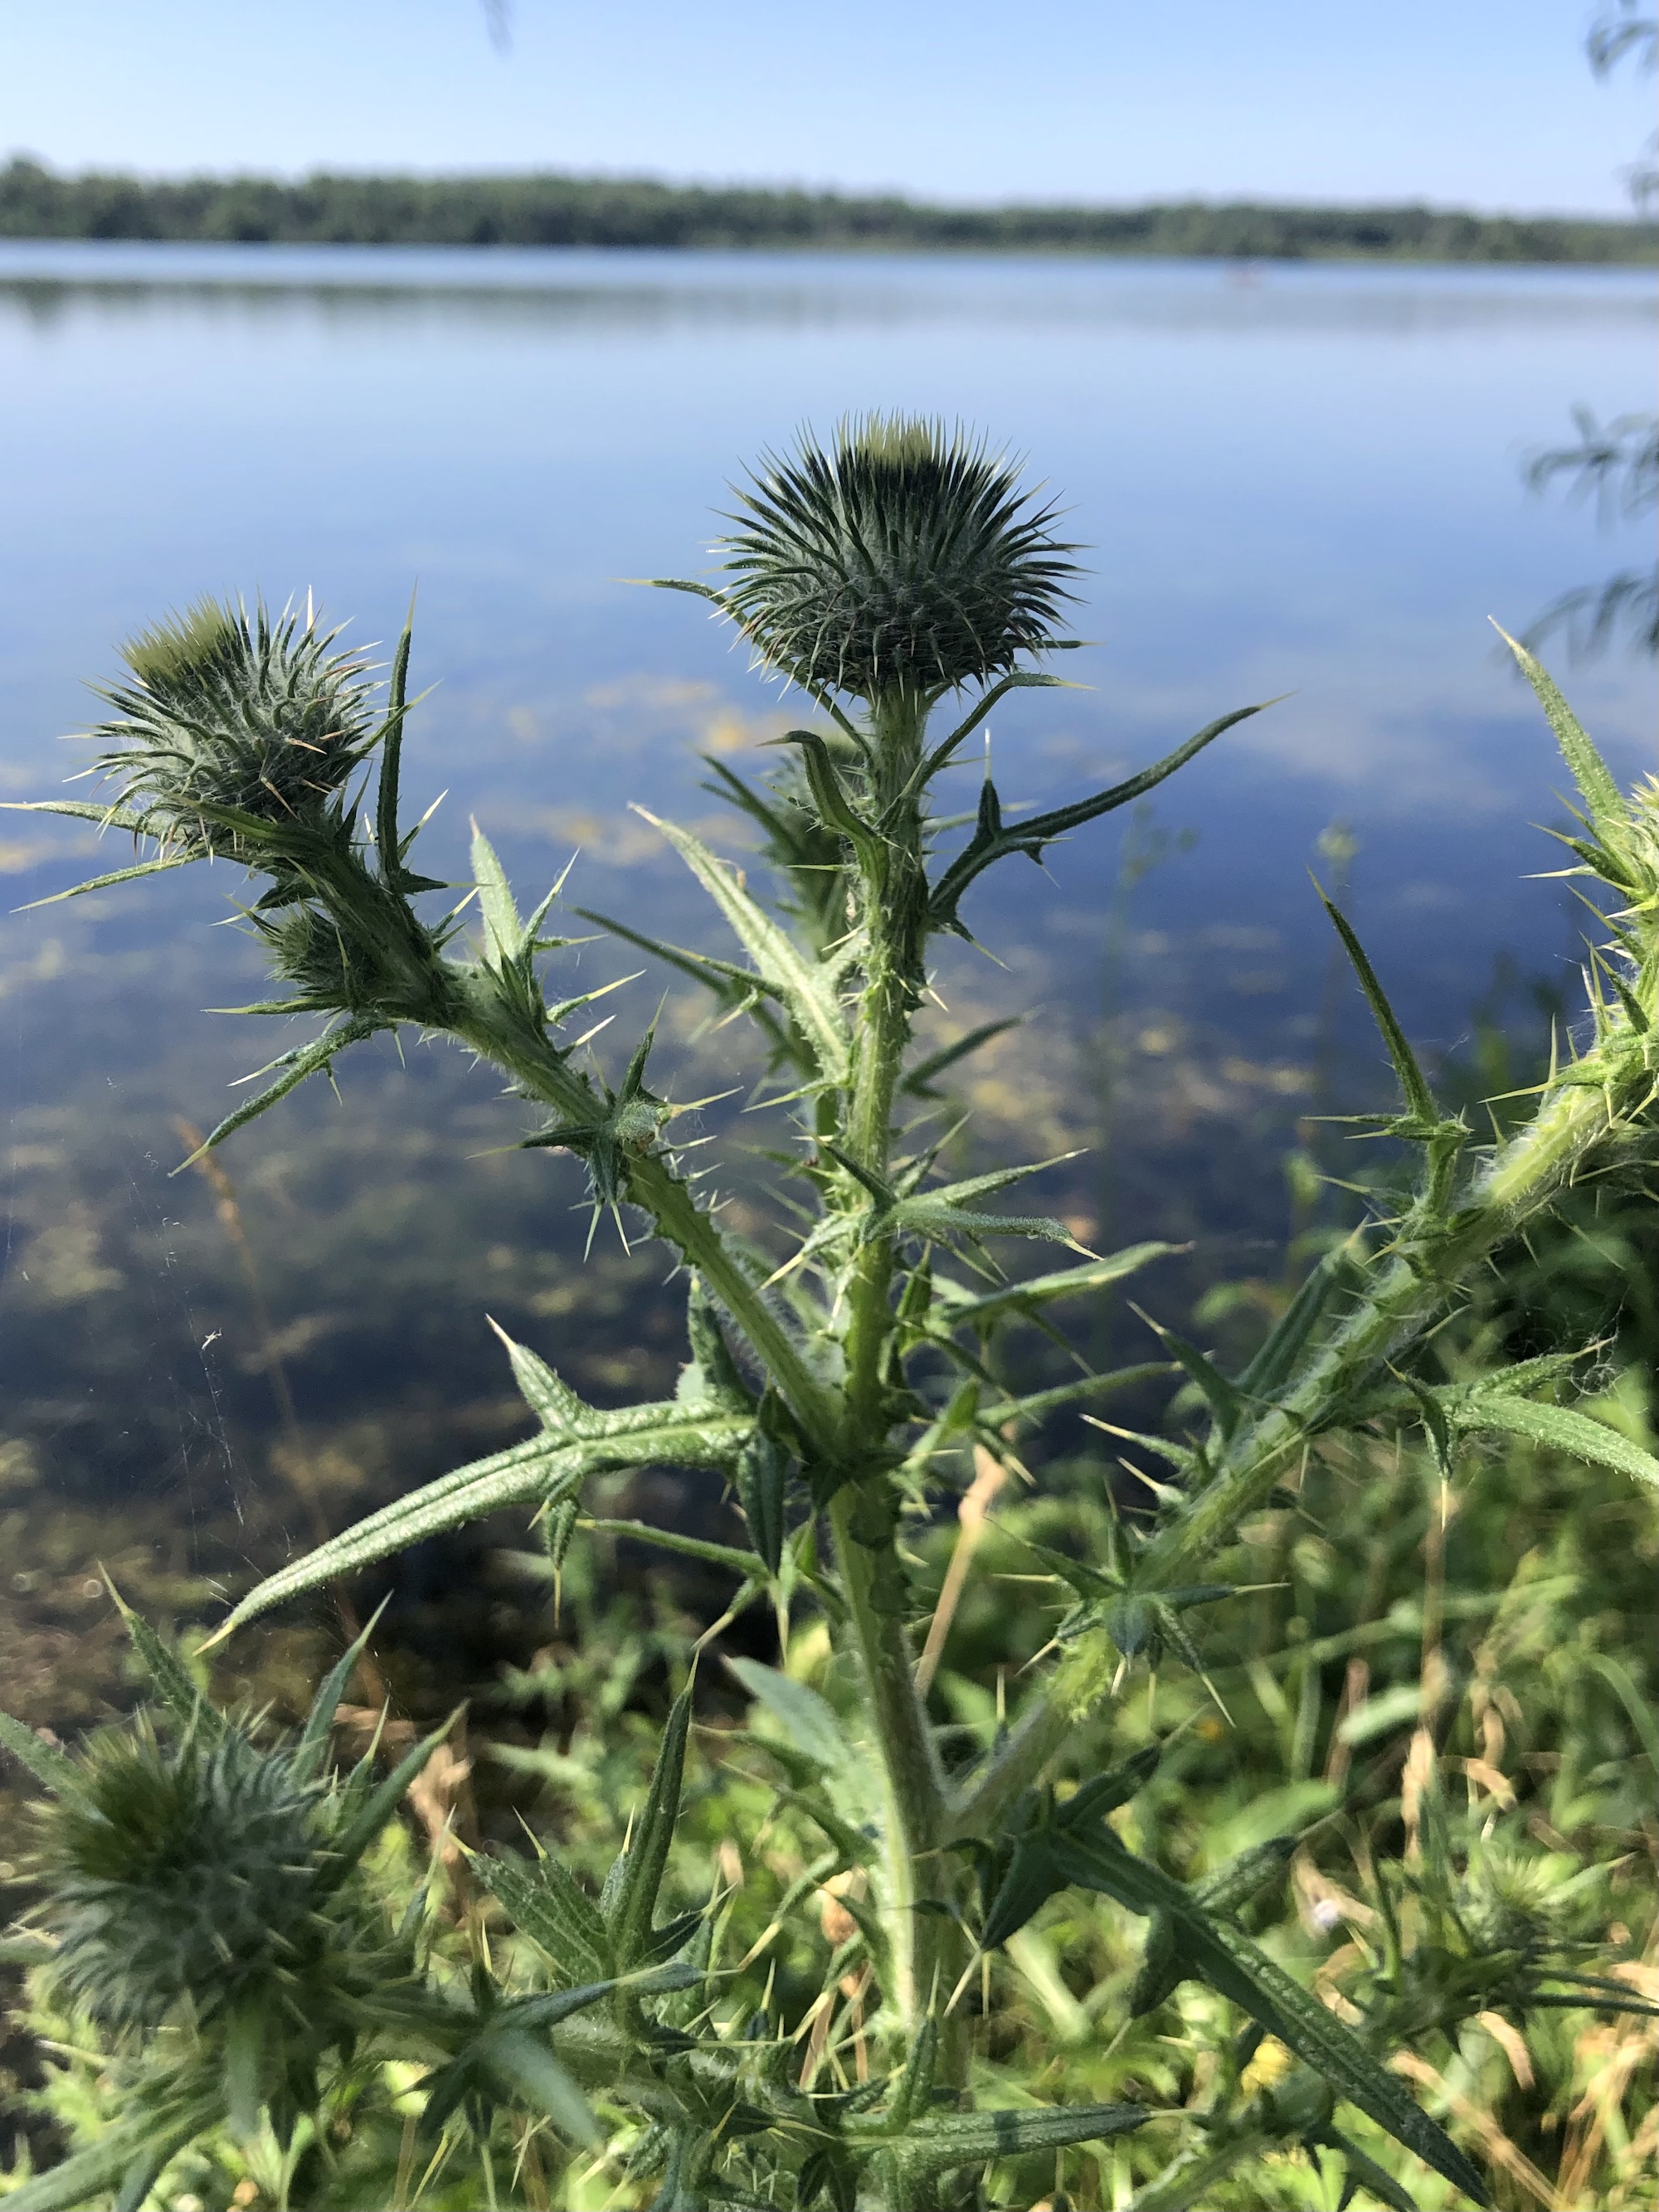 Bull Thistle along shore of Lake Wingra in Vilas Park in Madison, Wisconsin on July 14, 2022.